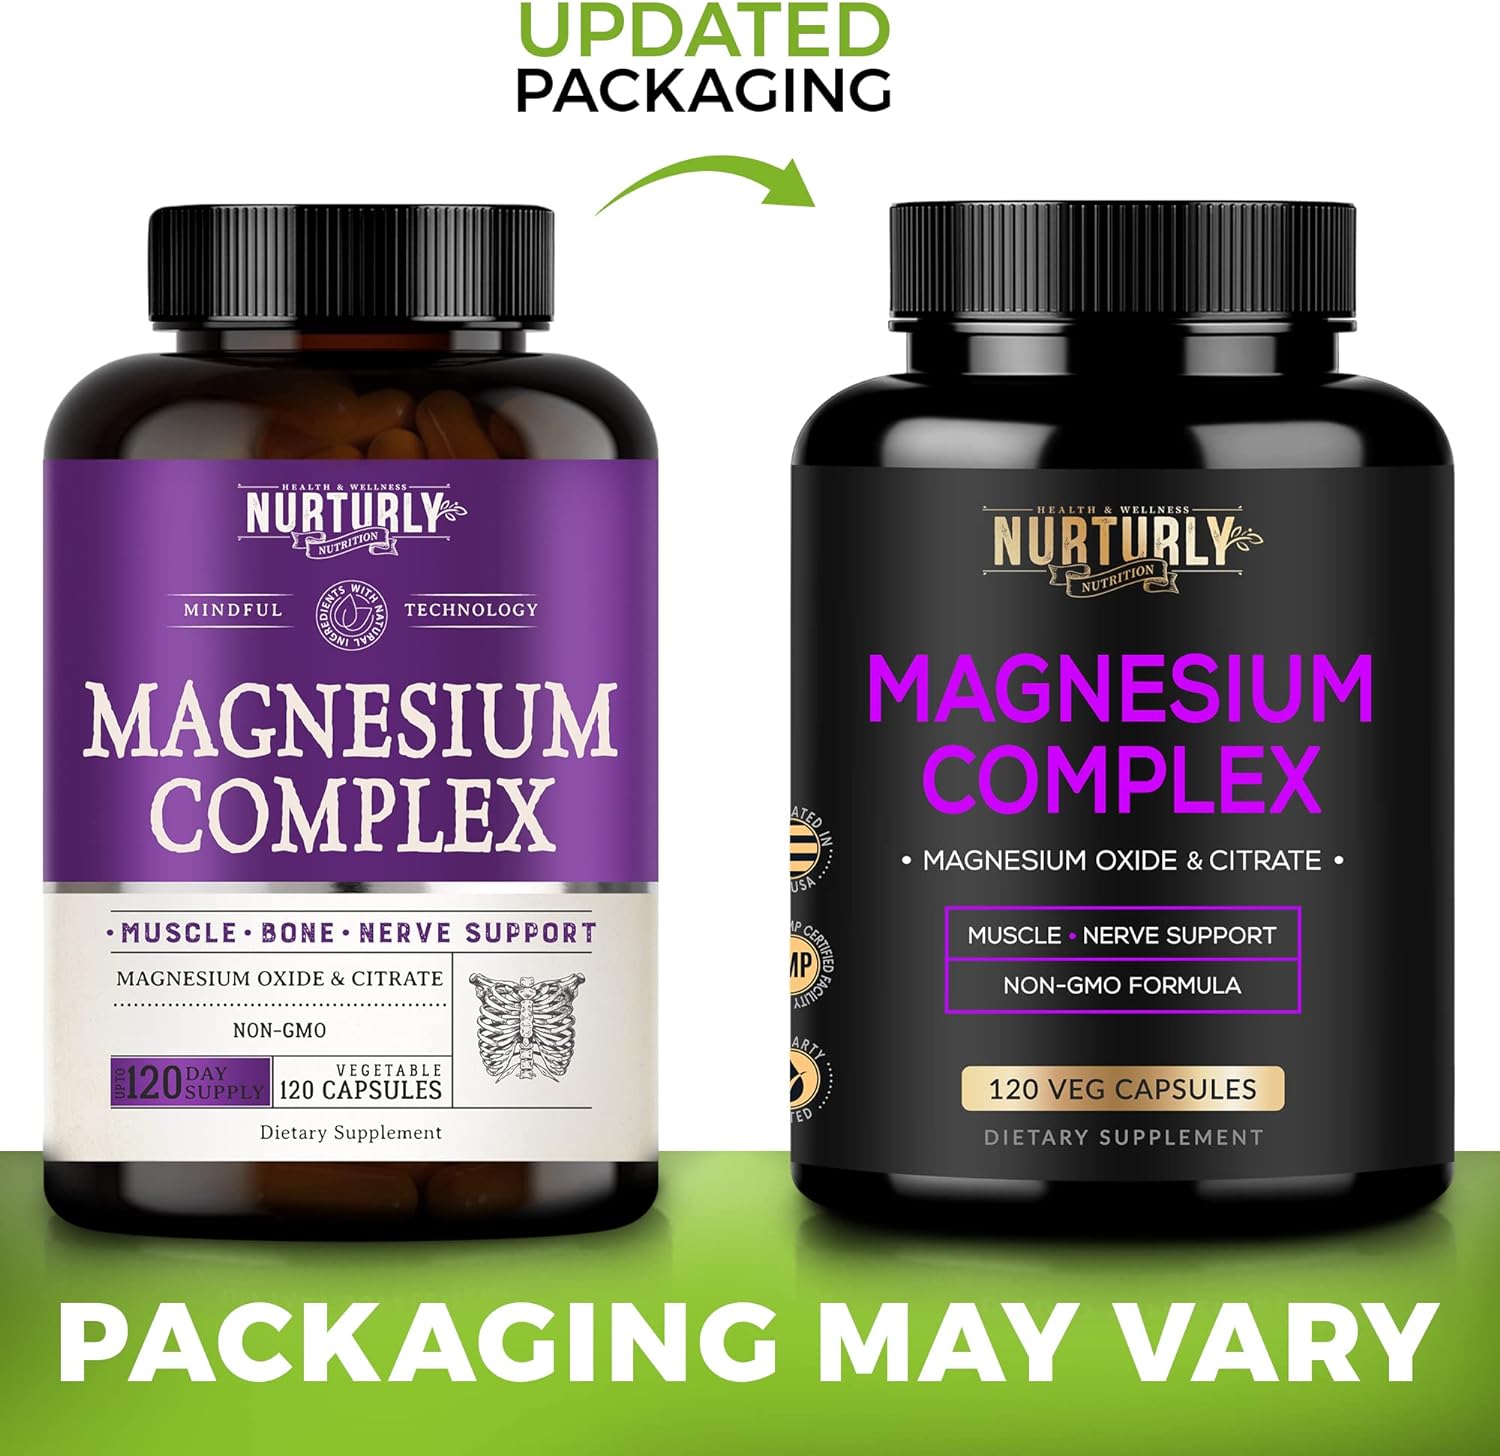 NURTURLY Magnesium and Vitamin B Complex - Magnesium Citrate 500MG - B Vitamins B1,B2,B3,B5,B6,B7,B9,B12 and Biotin - Muscle Relaxatio, Sleep and Energy, Immunity and Mood Support